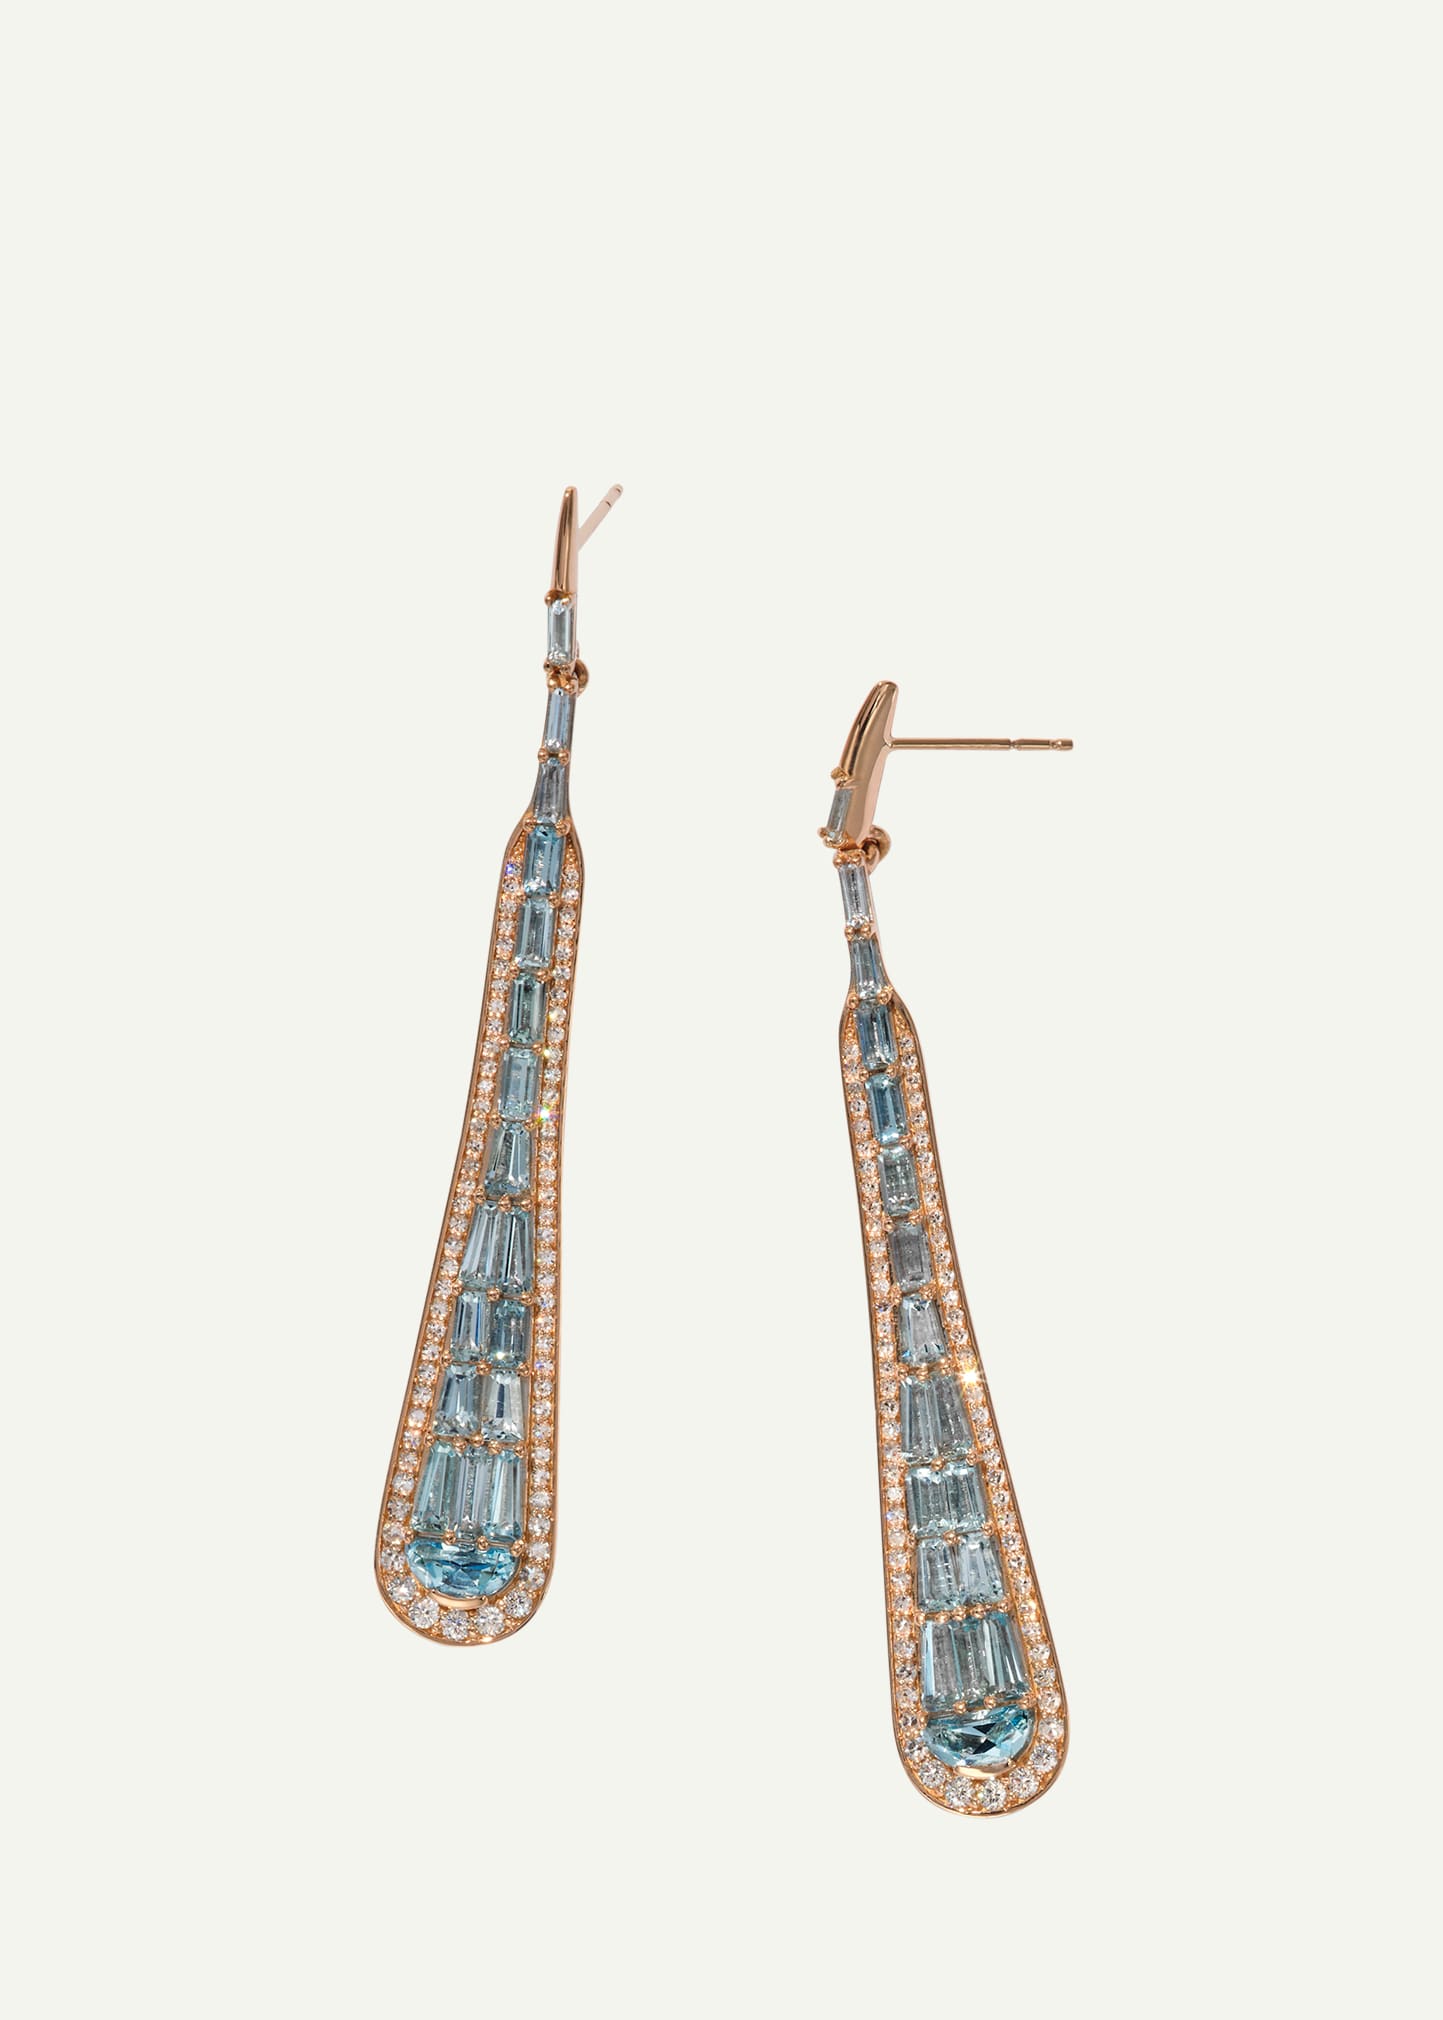 20K Rose Gold Large Oar Earrings with Aquamarine and White Diamonds